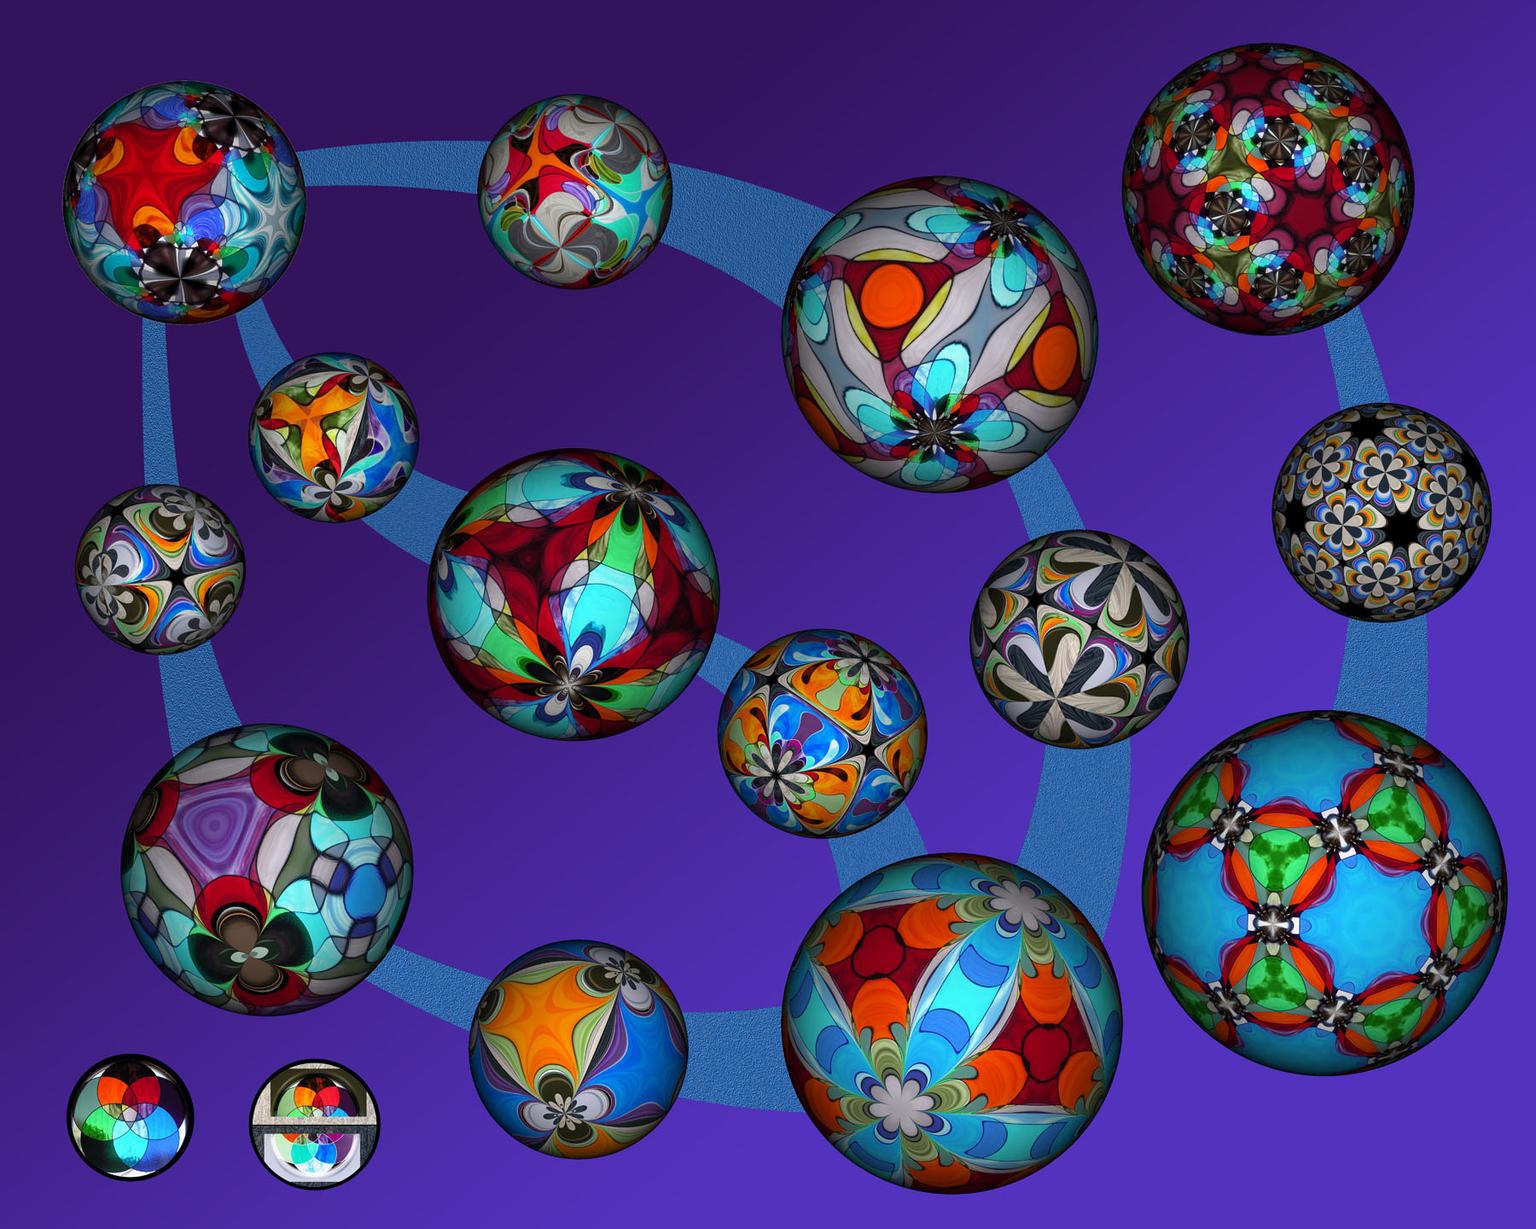 Image for entry 'Imaginary Planets: A Polyhedral Sampler'